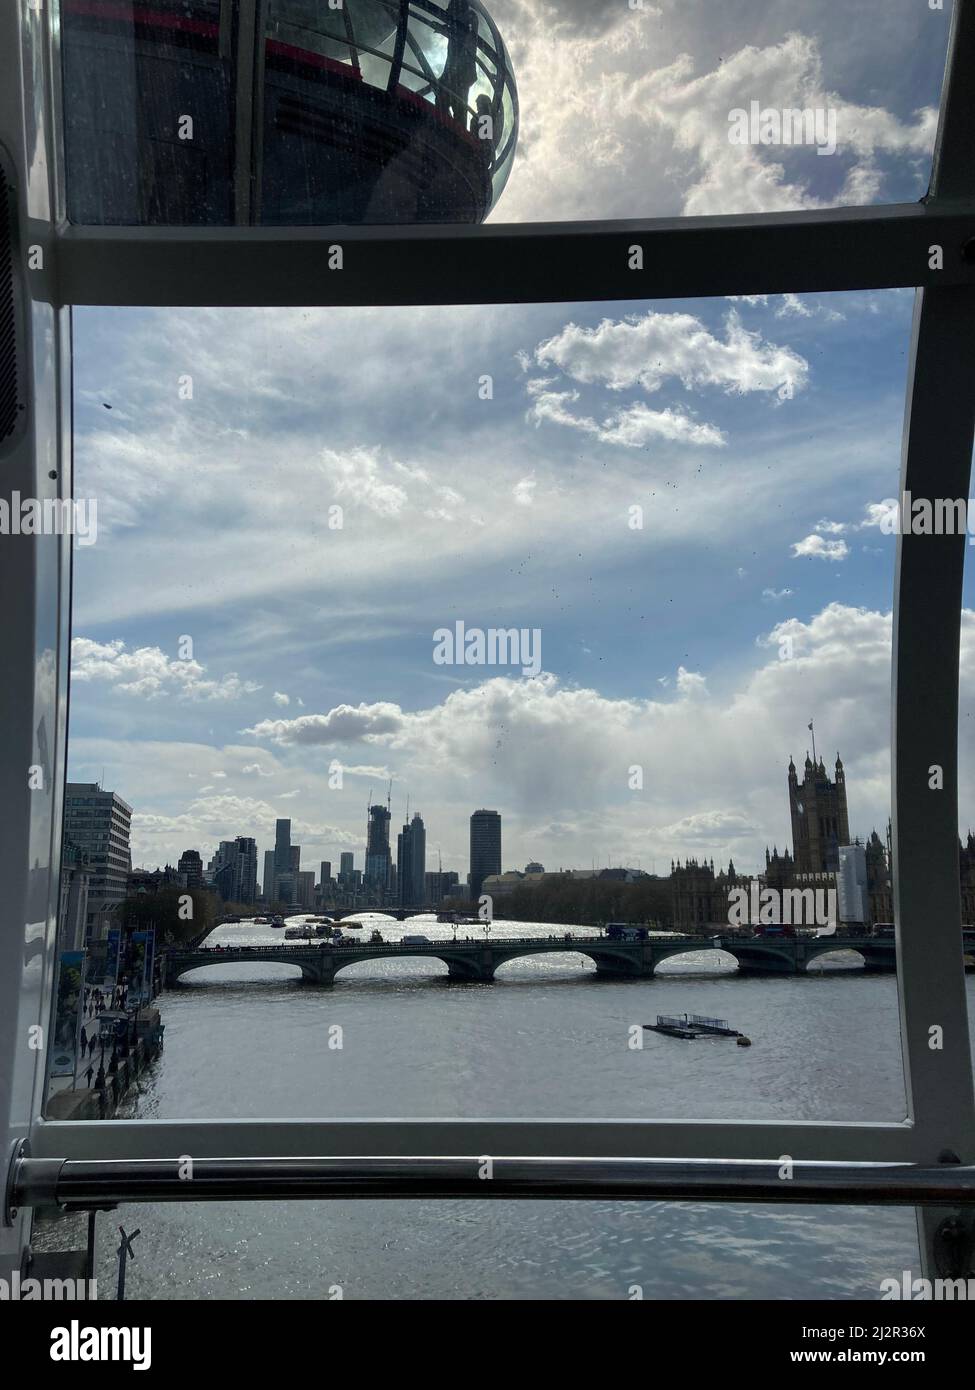 Amazing city views from the London Eye, or the Millennium Wheel, overlooking the River Thames on a nice day in Waterloo, London Stock Photo